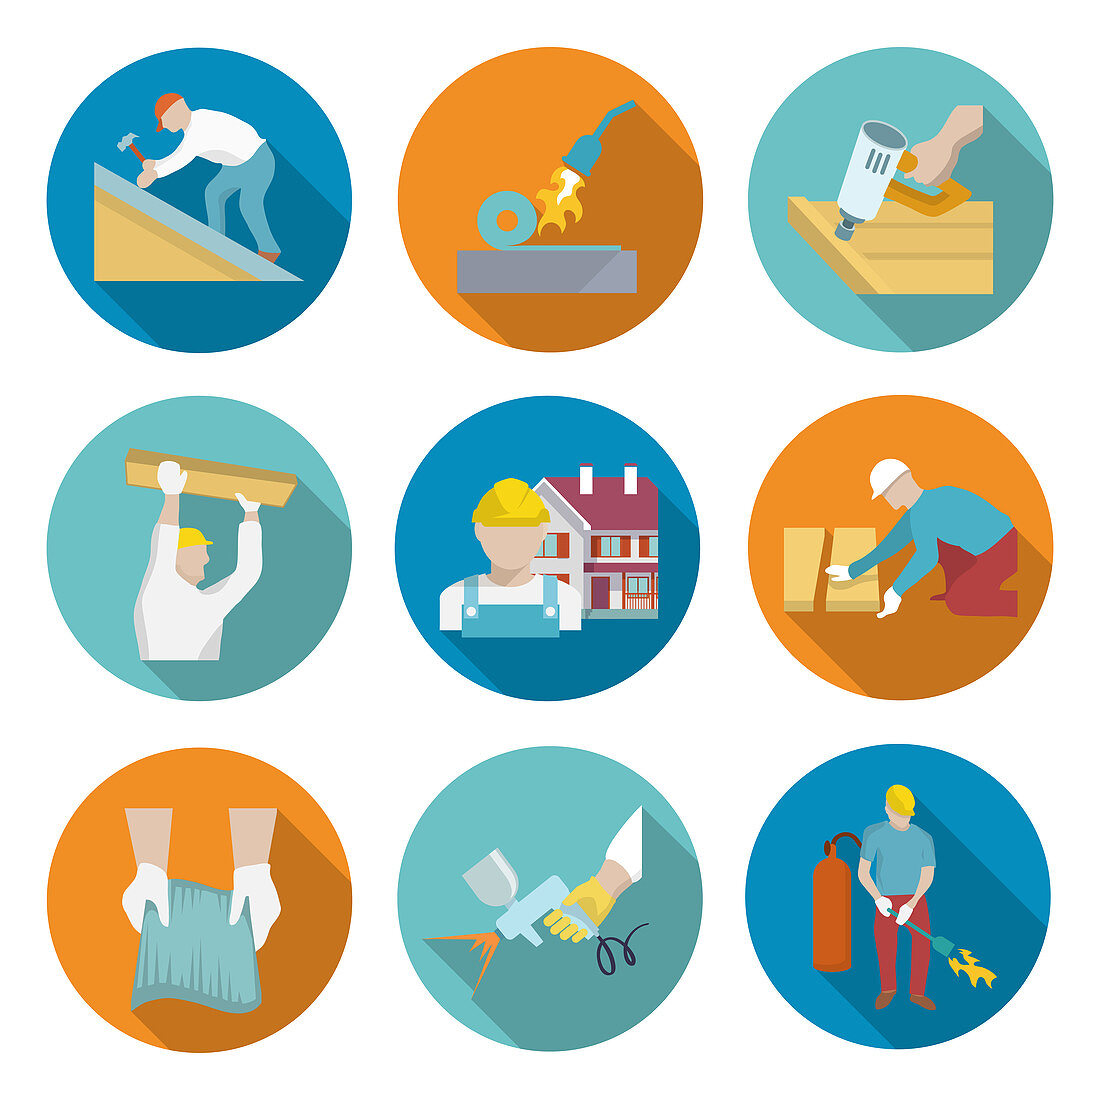 Roofing icons, illustration